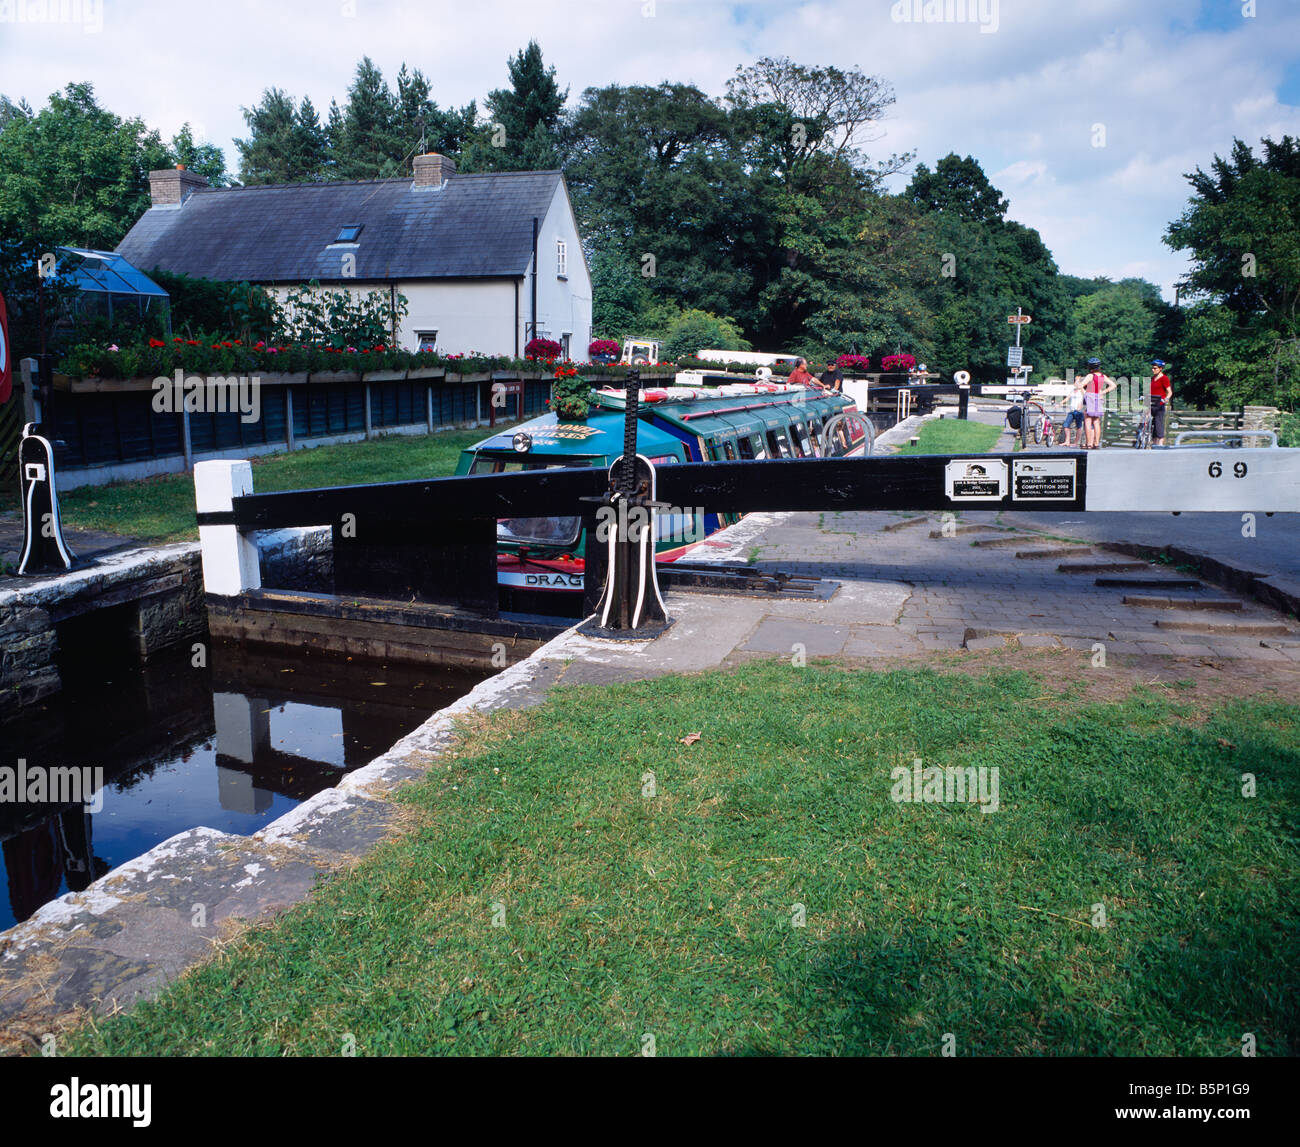 A narrowboat in the Brynich lock on the Monmouthshire and Brecon Canal near Brecon in the Bannau Brycheiniog (formerly Brecon Beacons) National Park, Powys, South Wales. Stock Photo